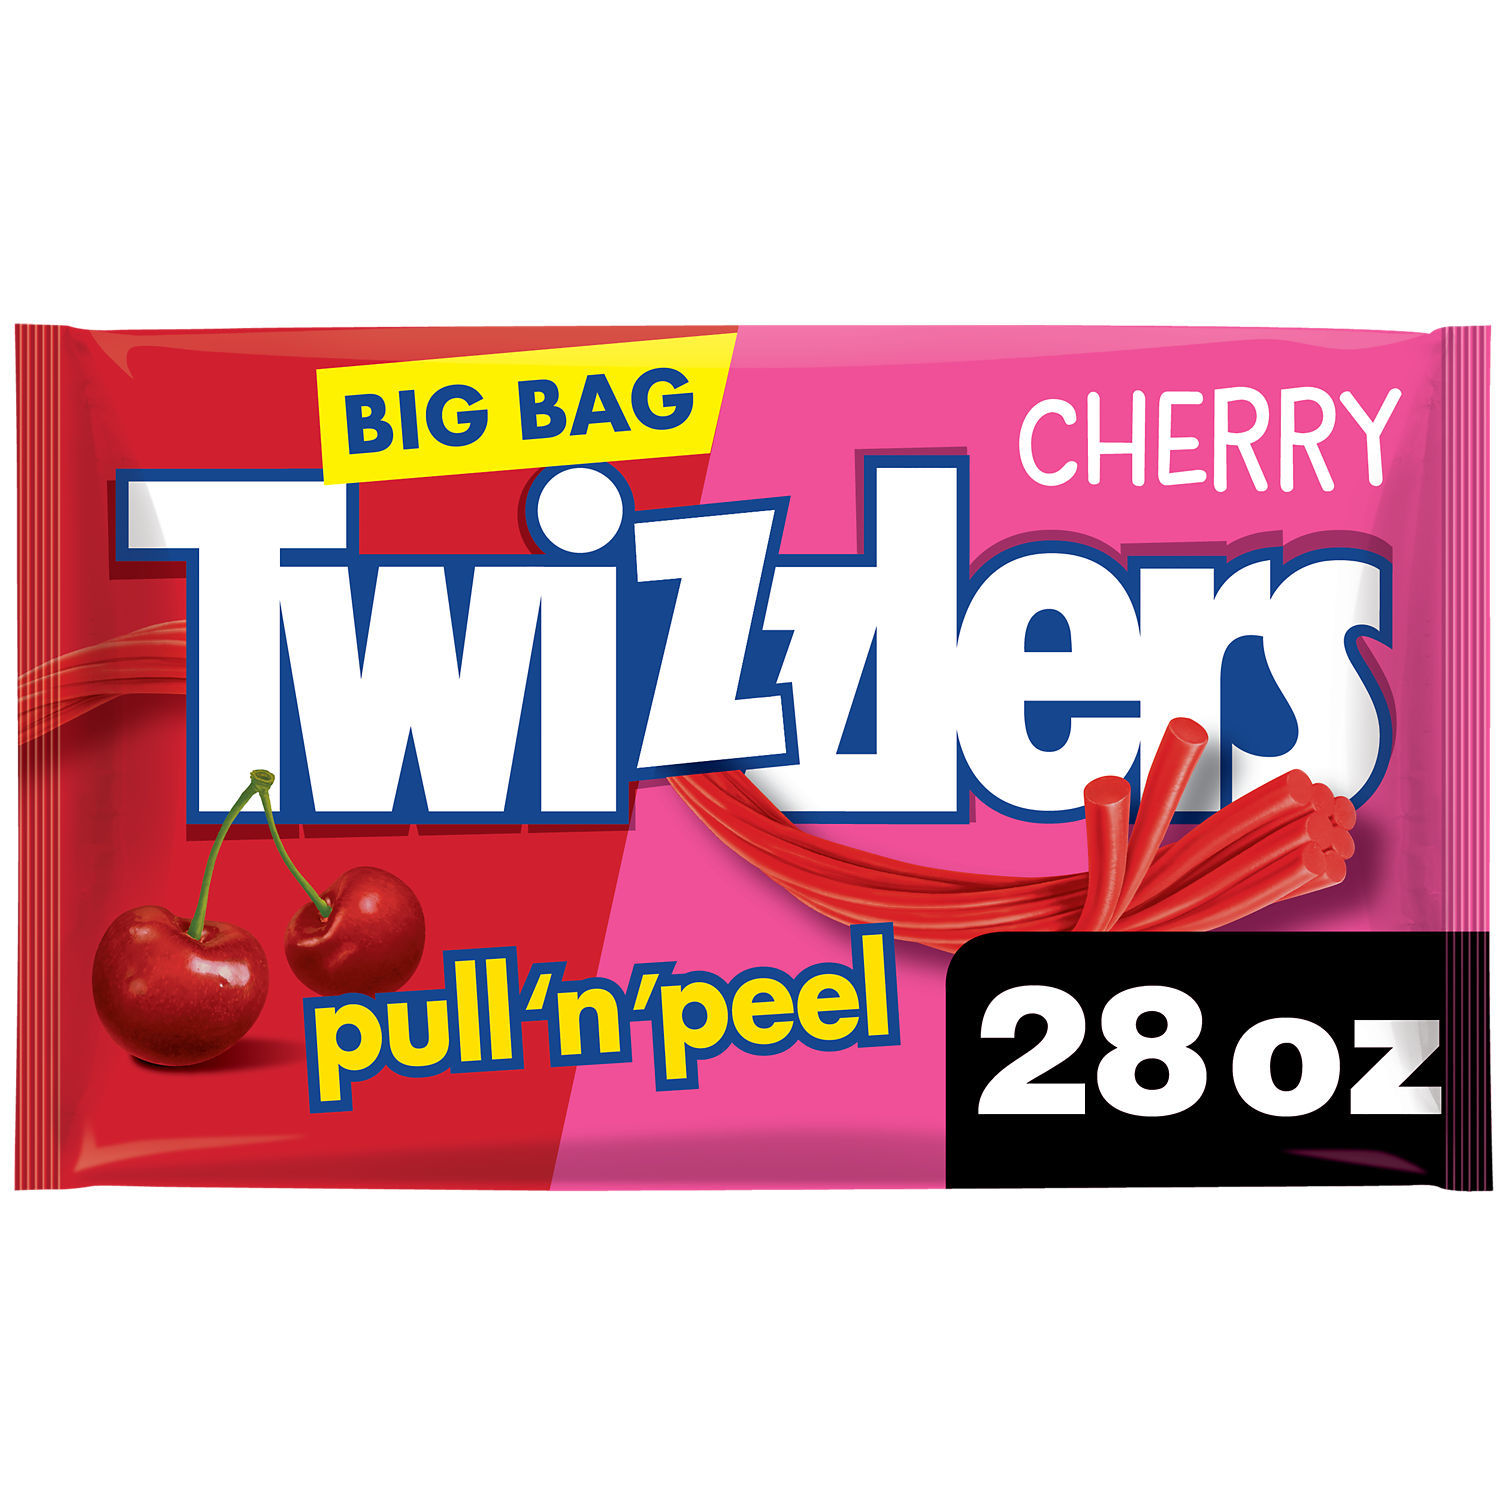 Twizzlers Pull 'N' Peel Cherry Flavored Licorice Style Low Fat Candy, Big Bag 28 oz - image 1 of 9